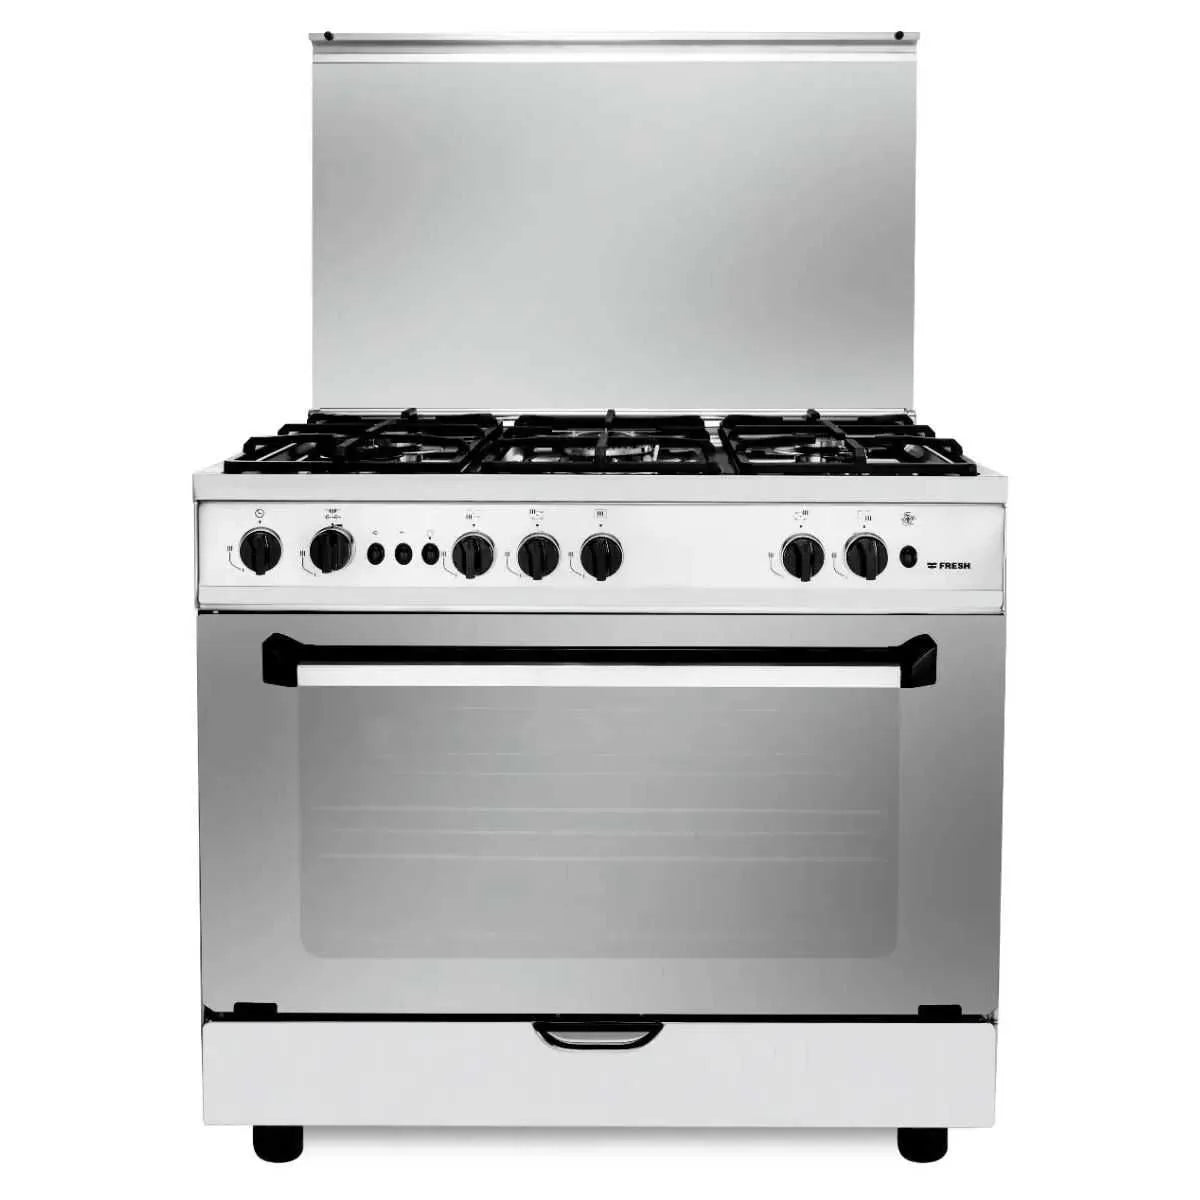 Fresh Plaza Gas Cooker, 5 Burners, 90 cm, Stainless Steel - 500017301